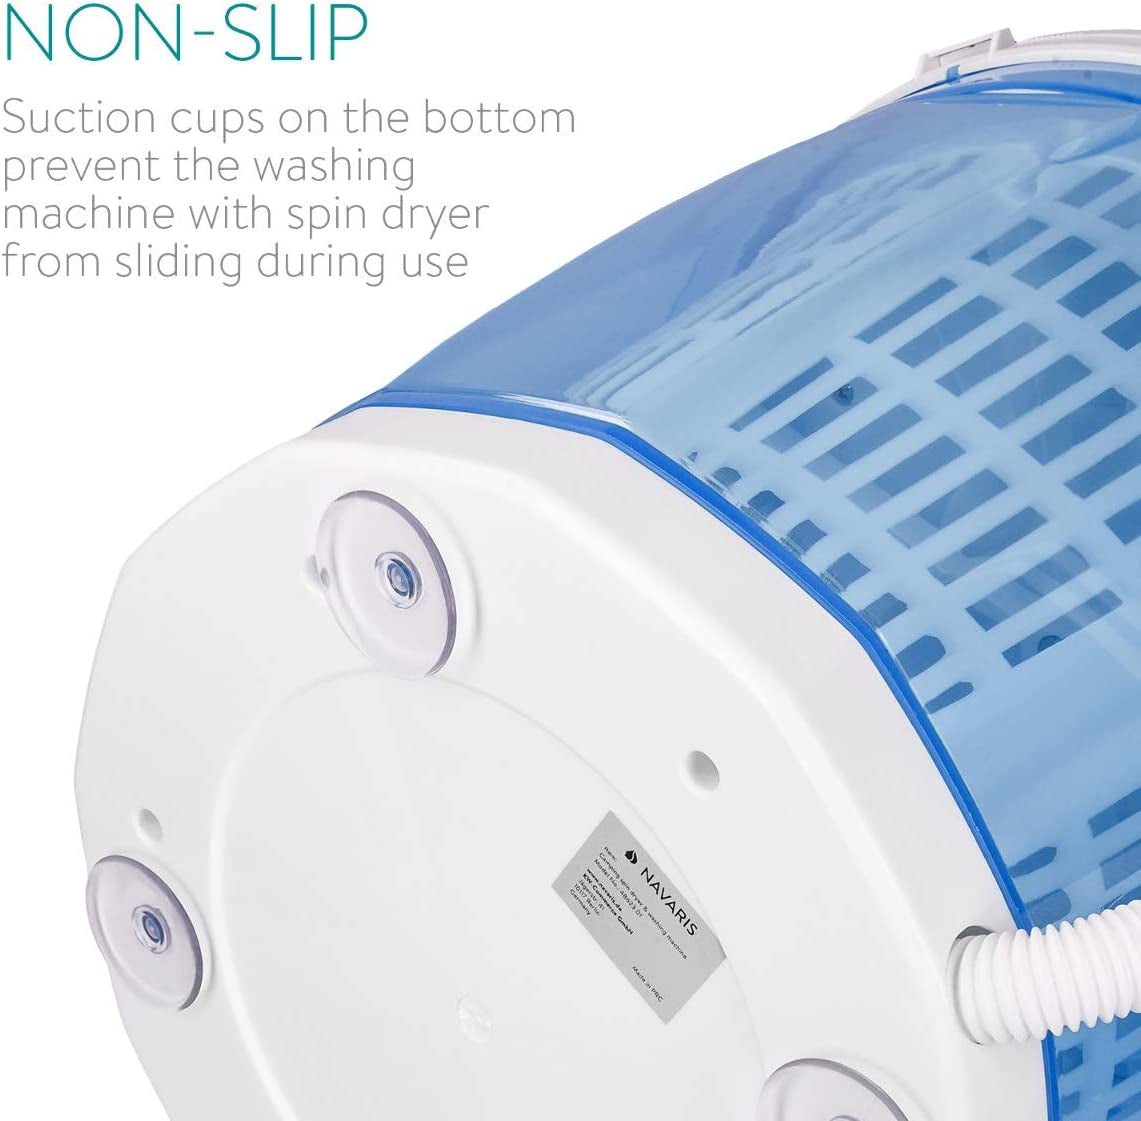 2-In-1 Mini Washing Machine and Spin Dryer - Holds up to 2 Kg - Portable Hand Cranked Non-Electric Top Washer/Dryer for Camping, Caravans